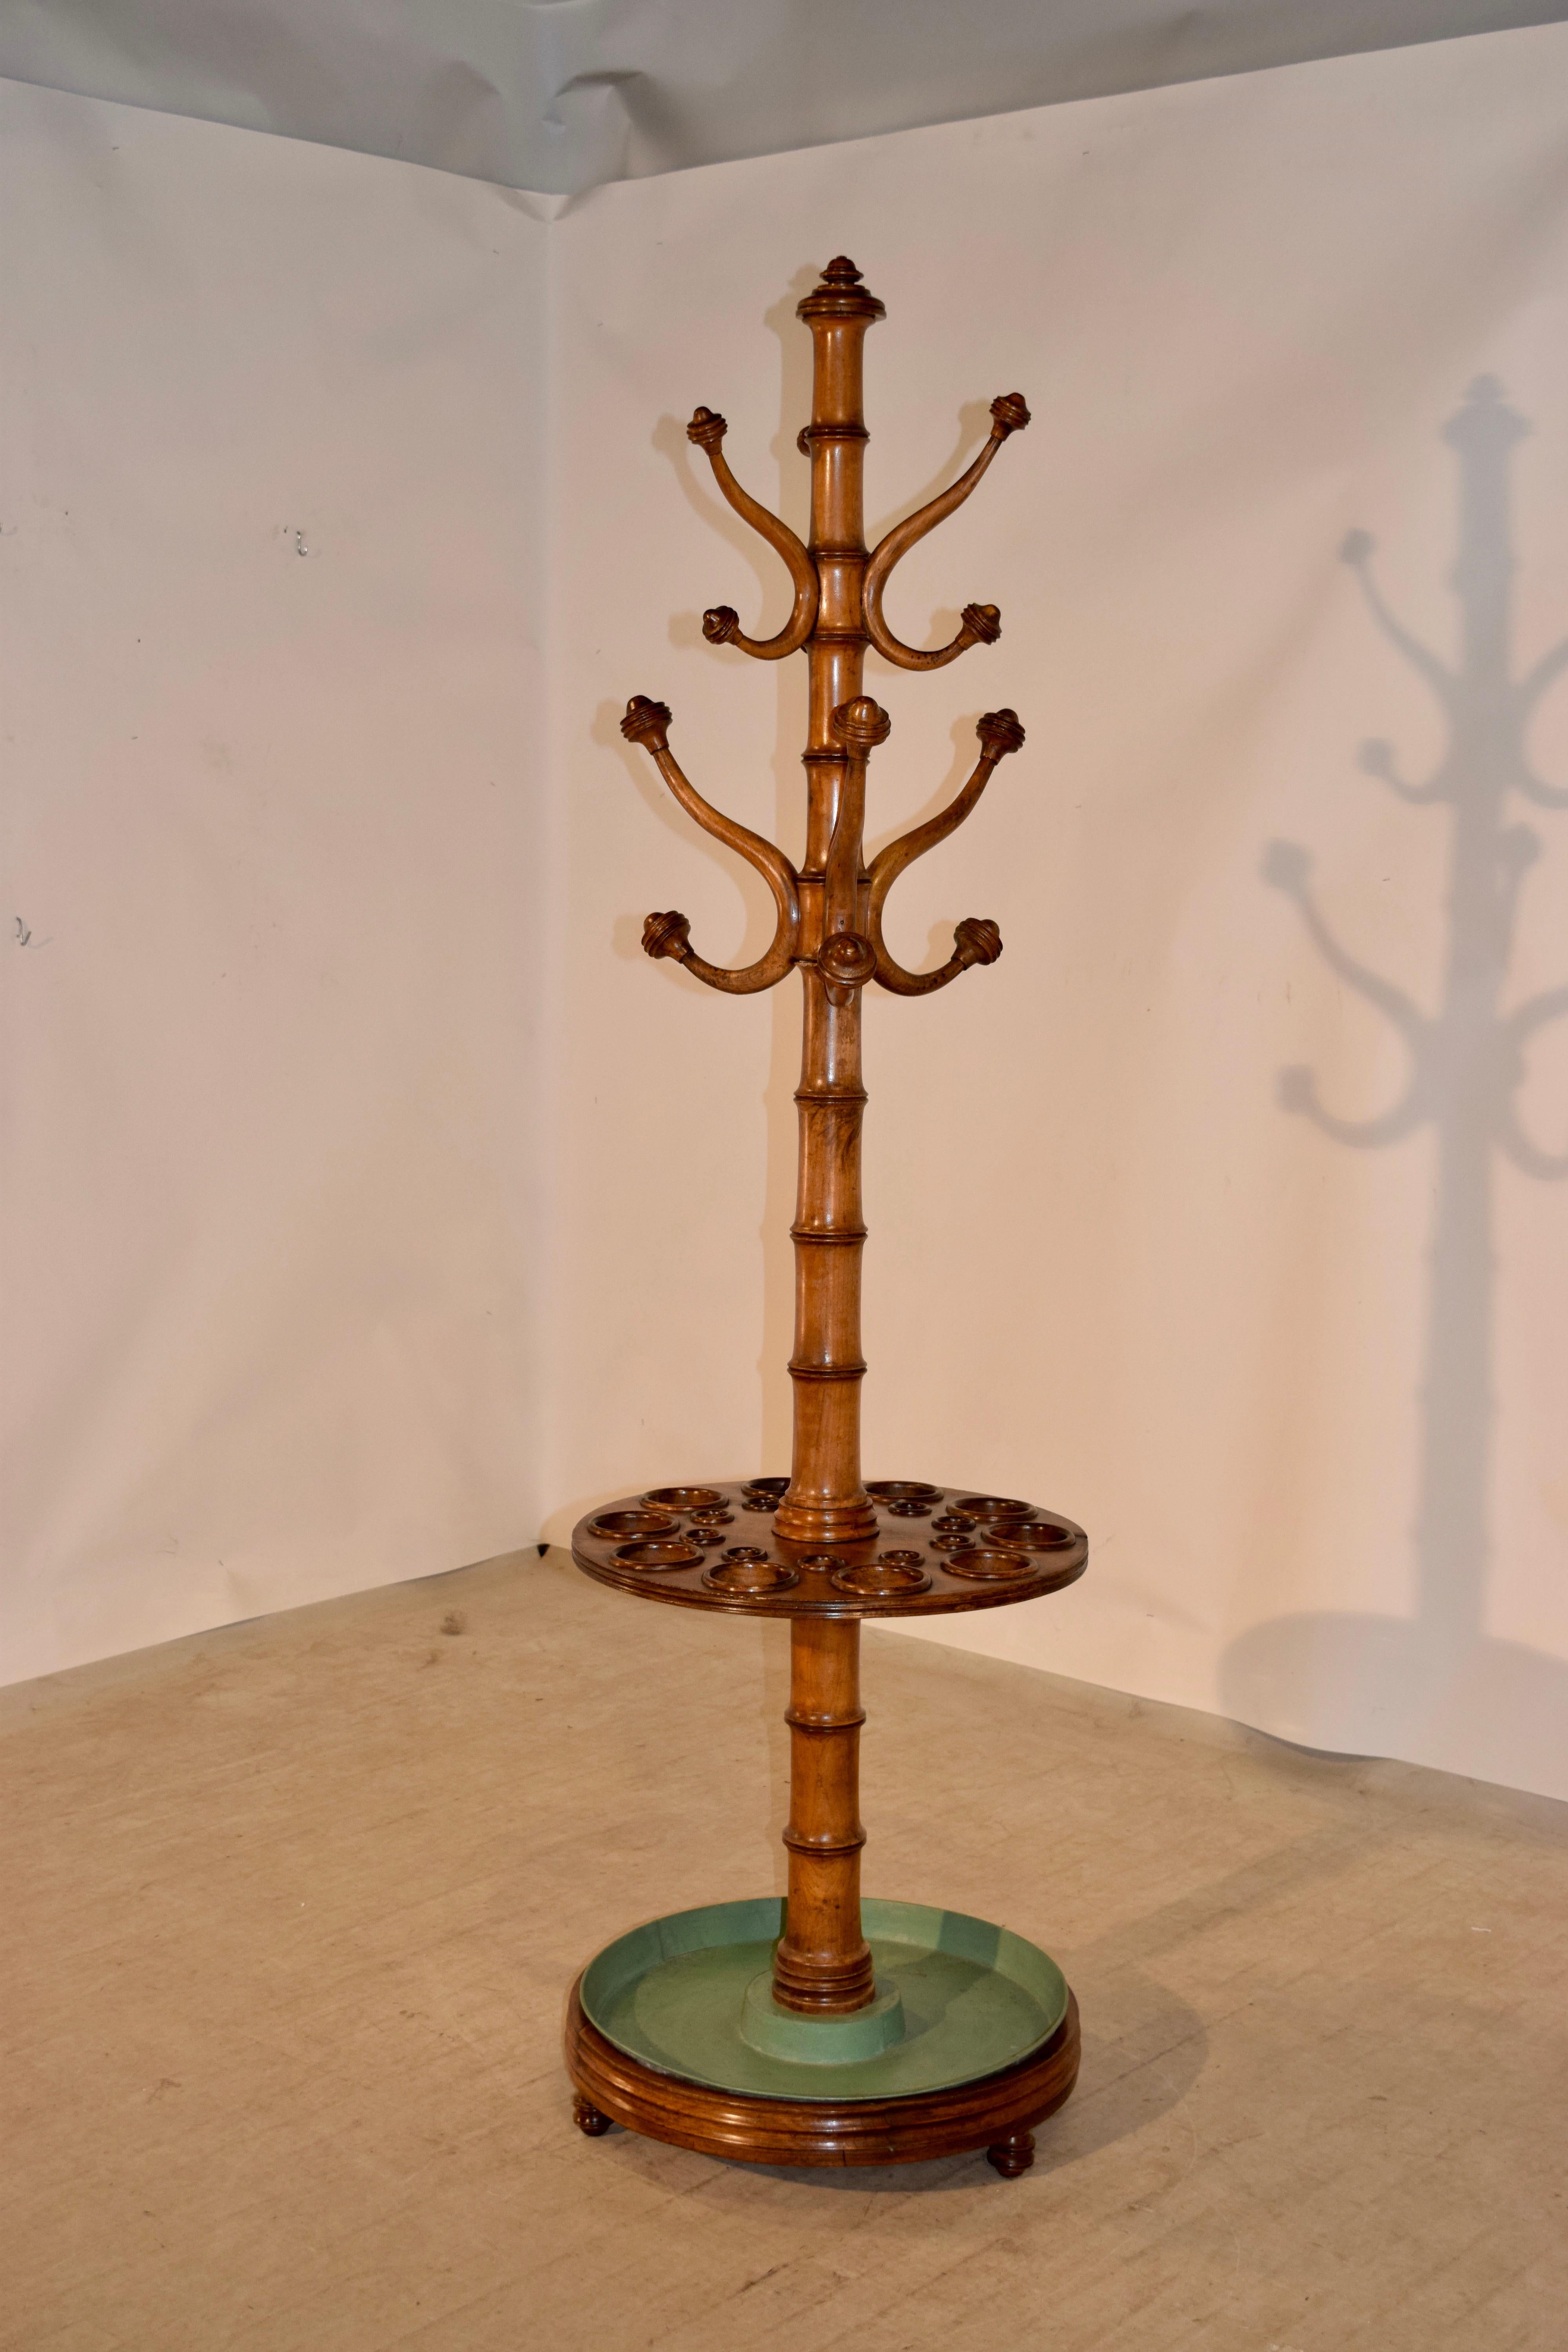 19th century French hall tree made from cherry and turned in the faux bamboo style of the Art Nouveau period. Wonderfully hand turned and original metal drip tray in base.